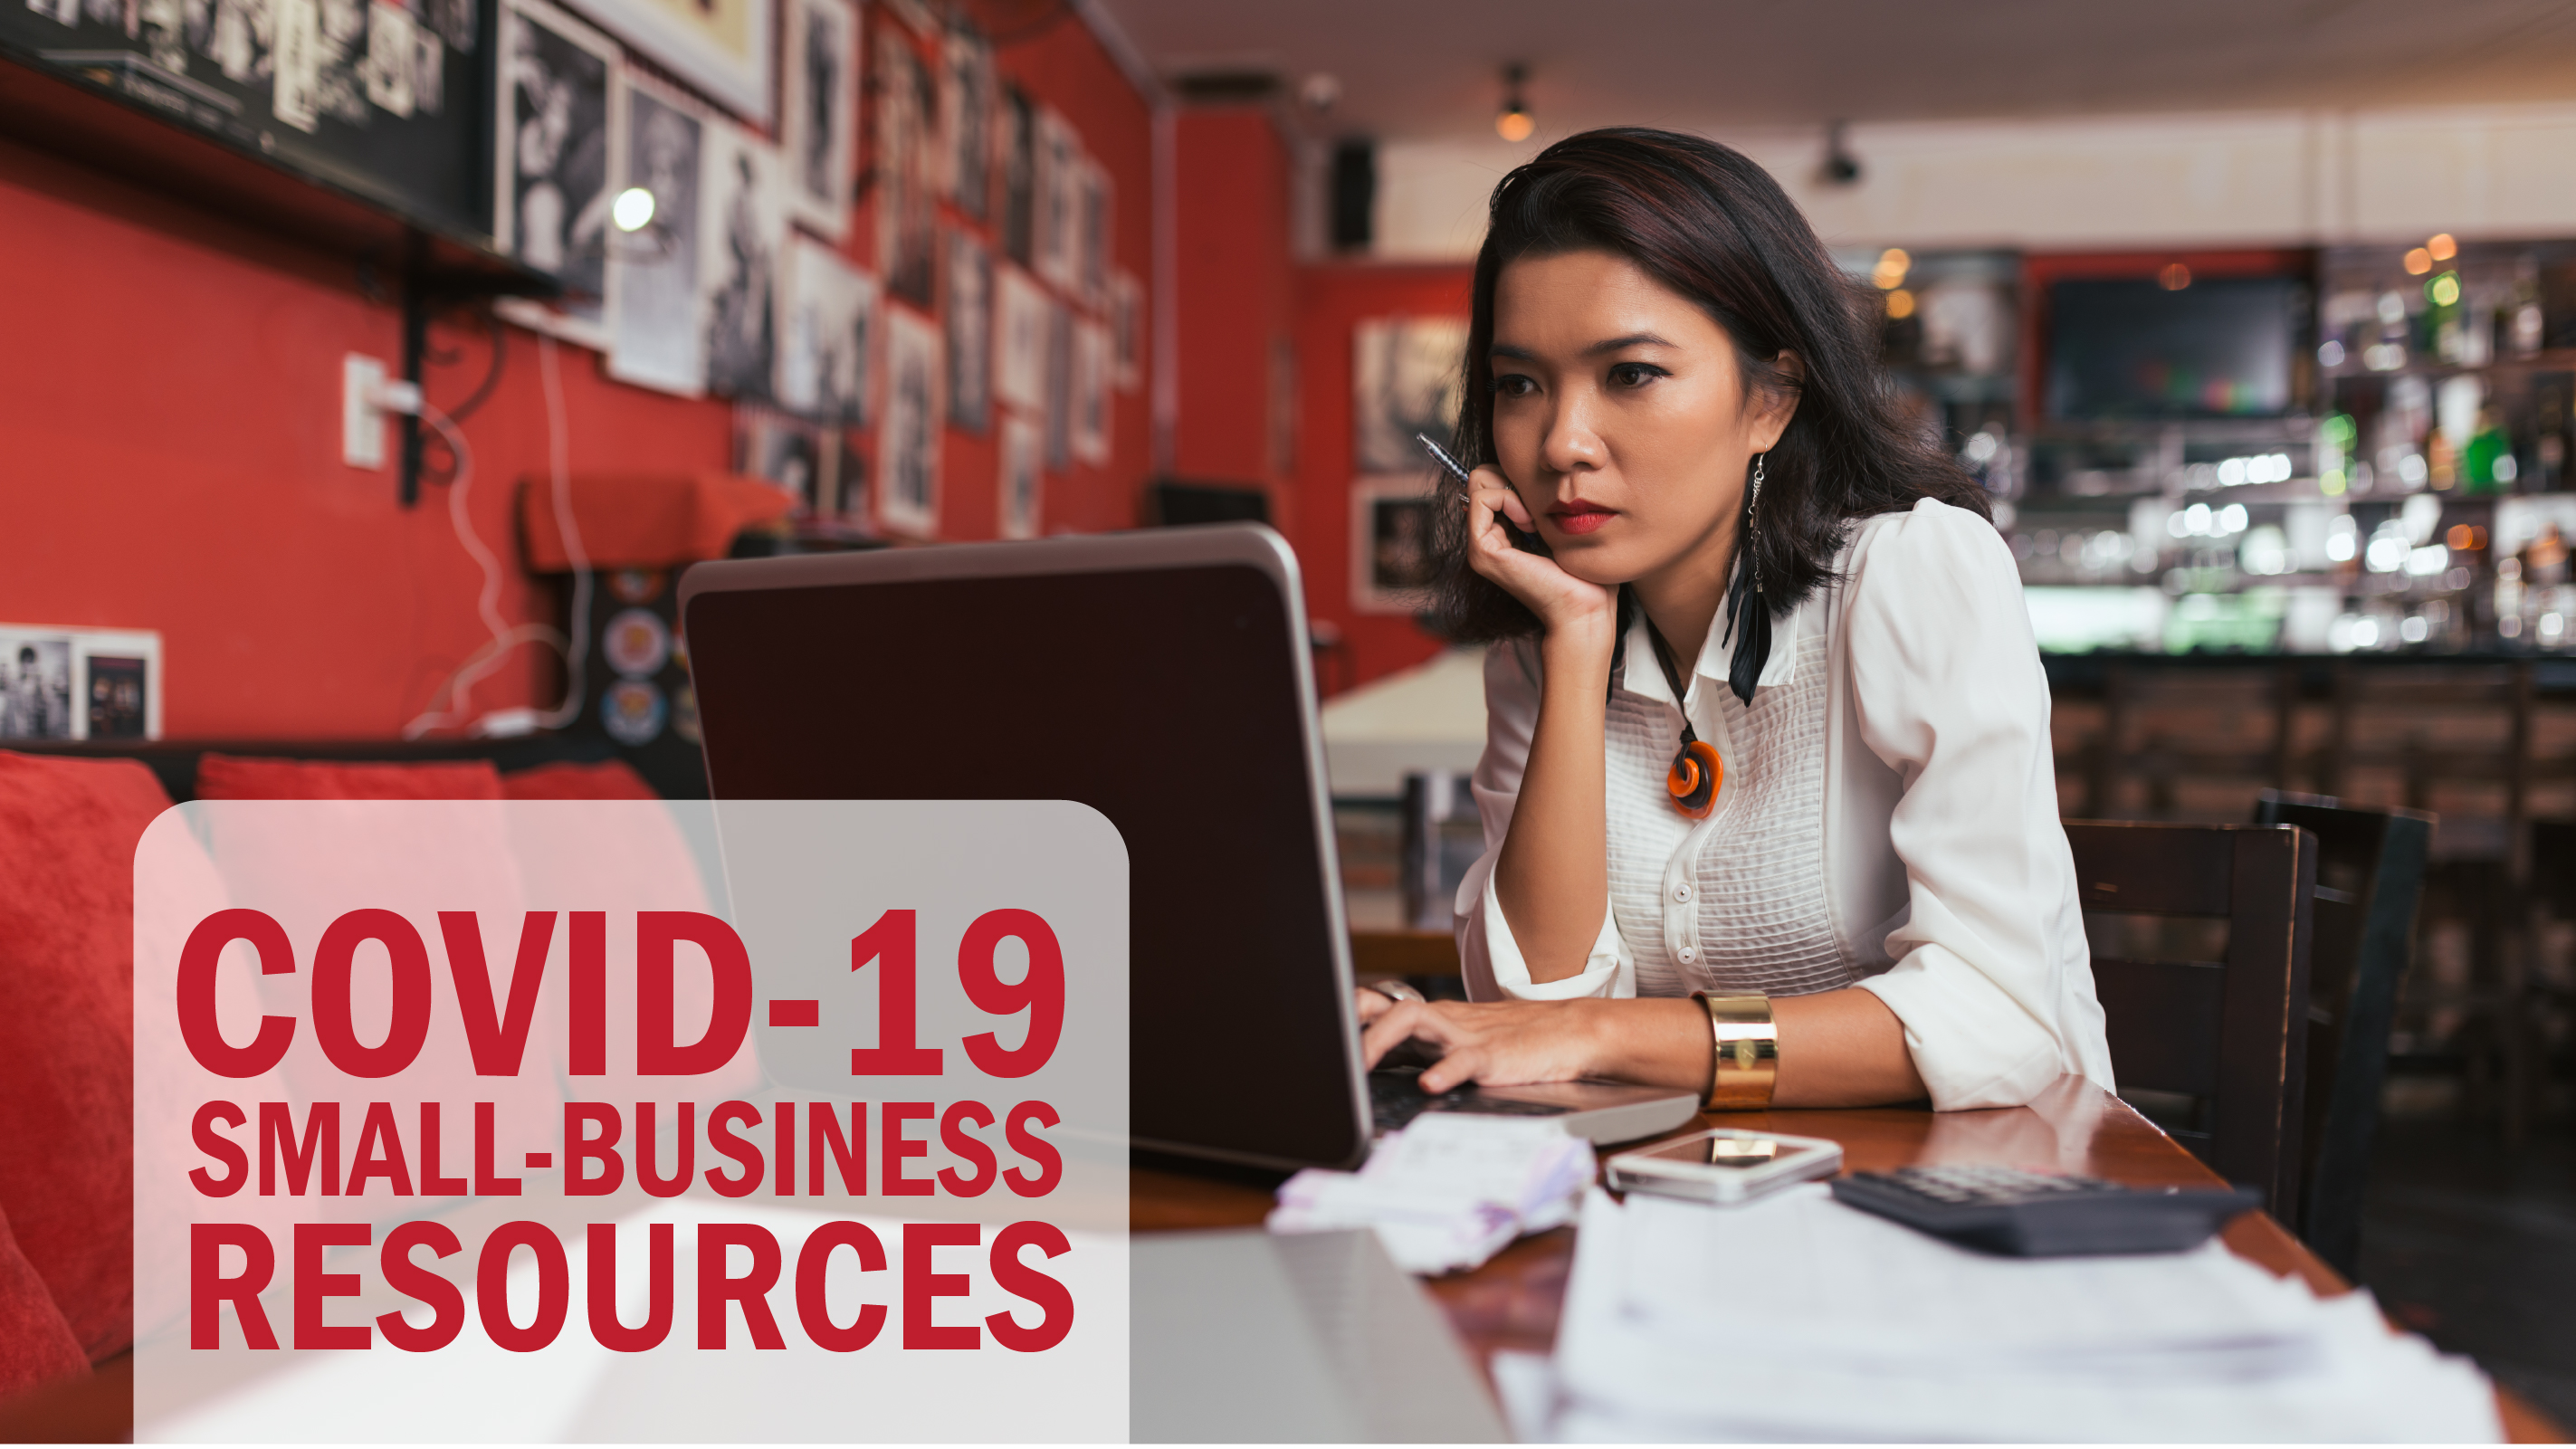 Resources for Small Business Owners